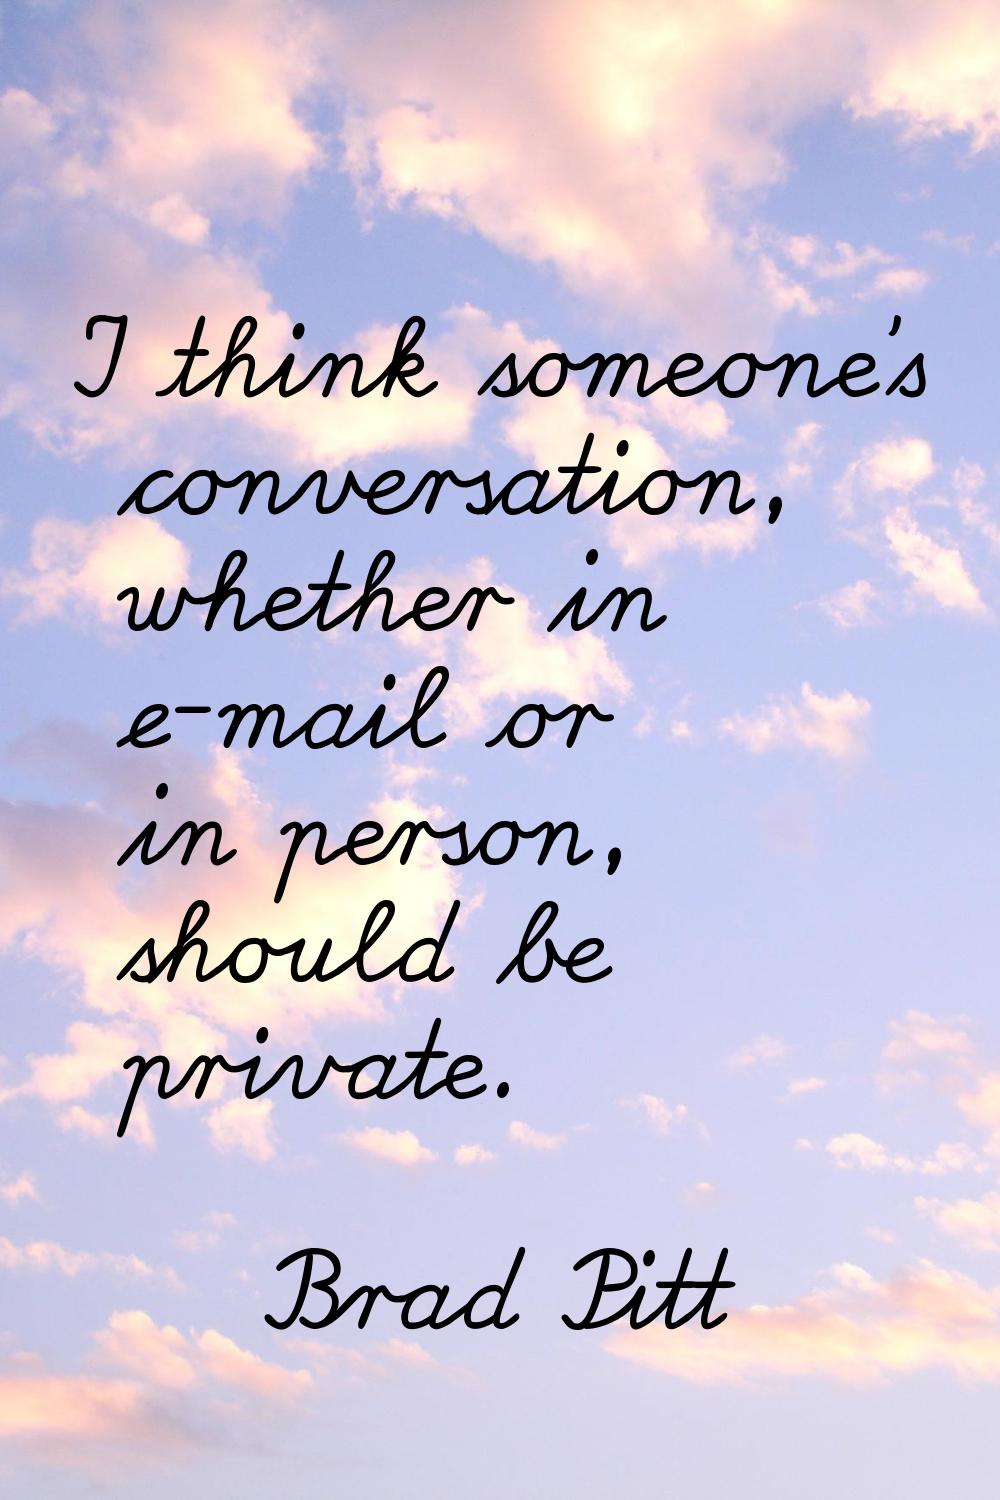 I think someone's conversation, whether in e-mail or in person, should be private.